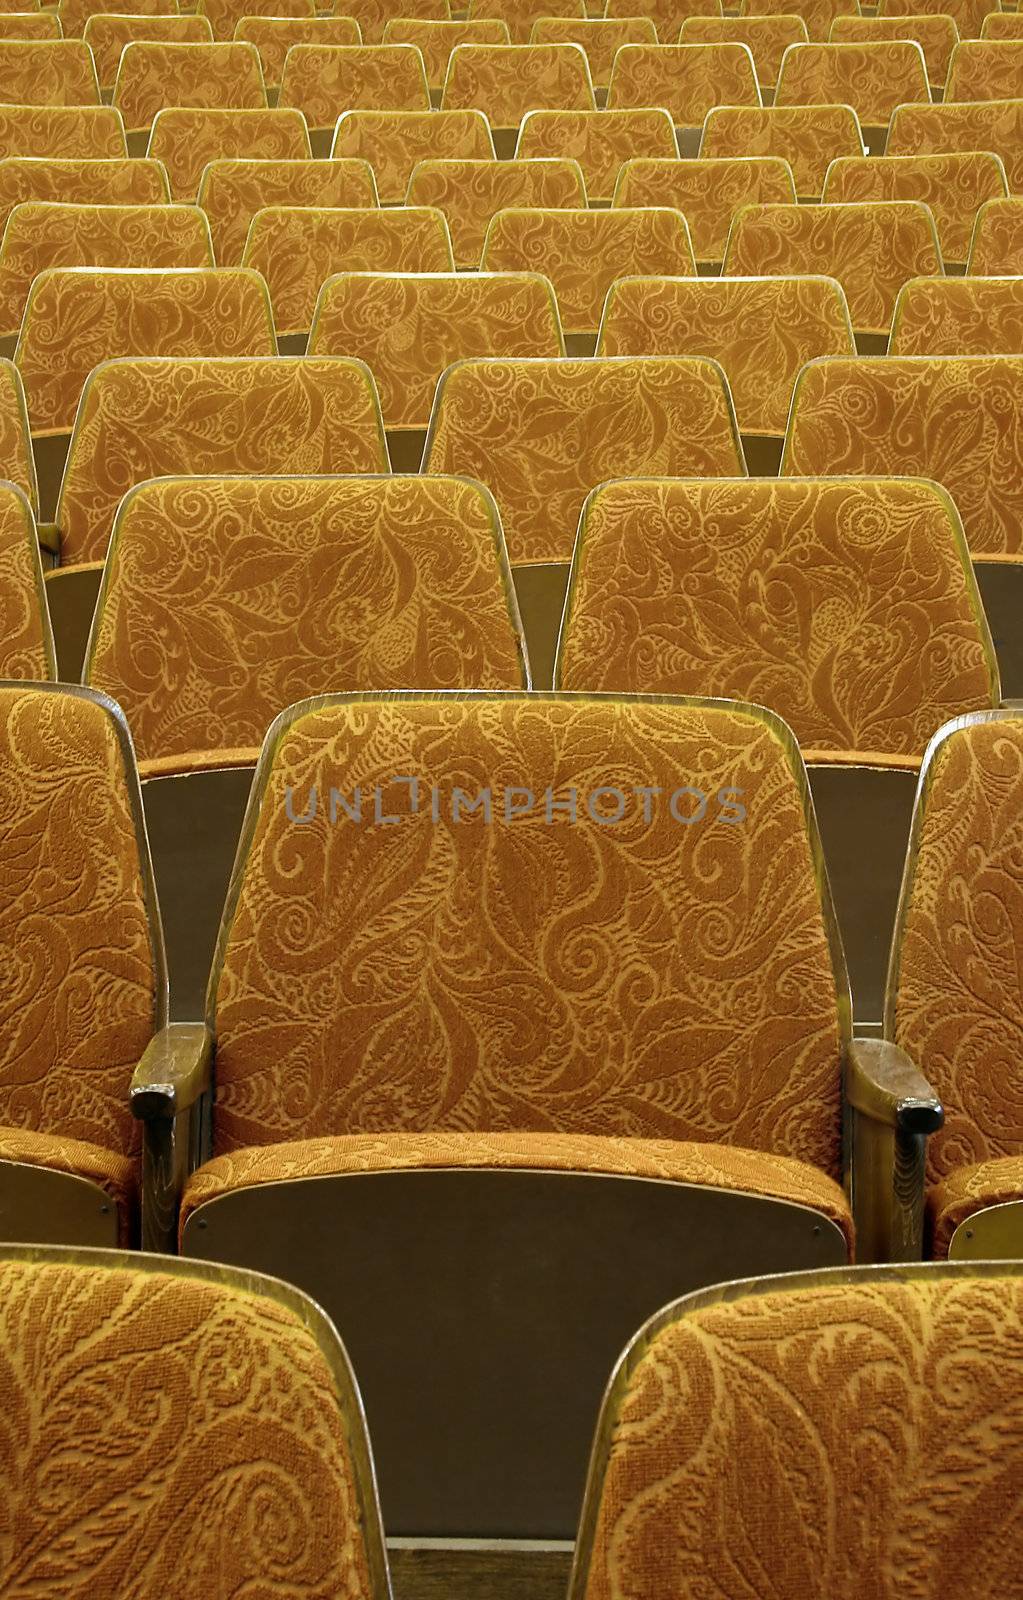 empty red wooden cinema/theater seats, number 13 in the middle,